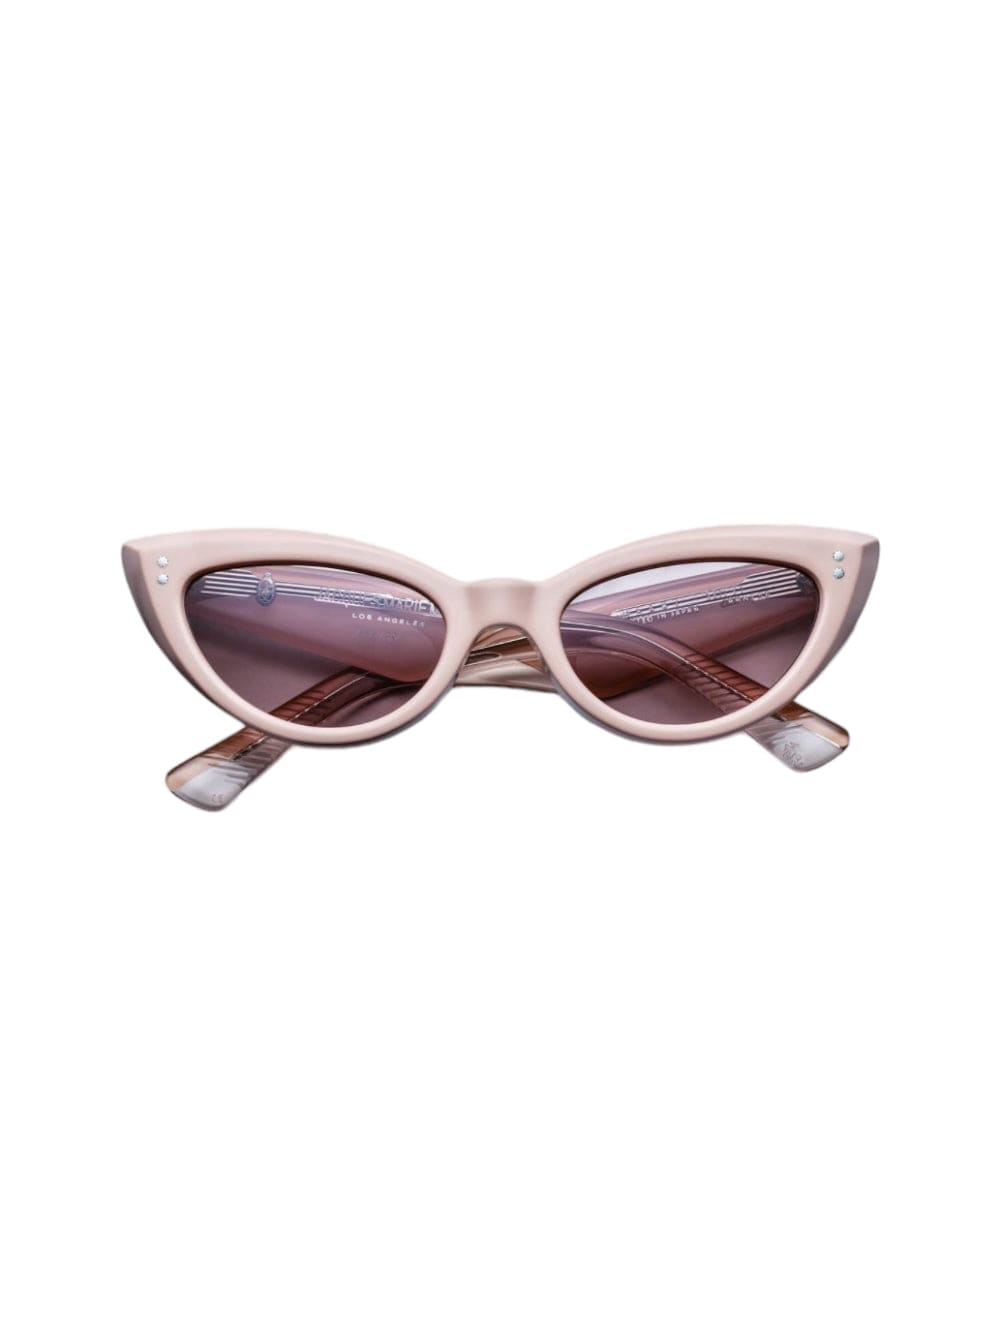 Jacques Marie Mage Heart - Nude Light Pink Sunglasses